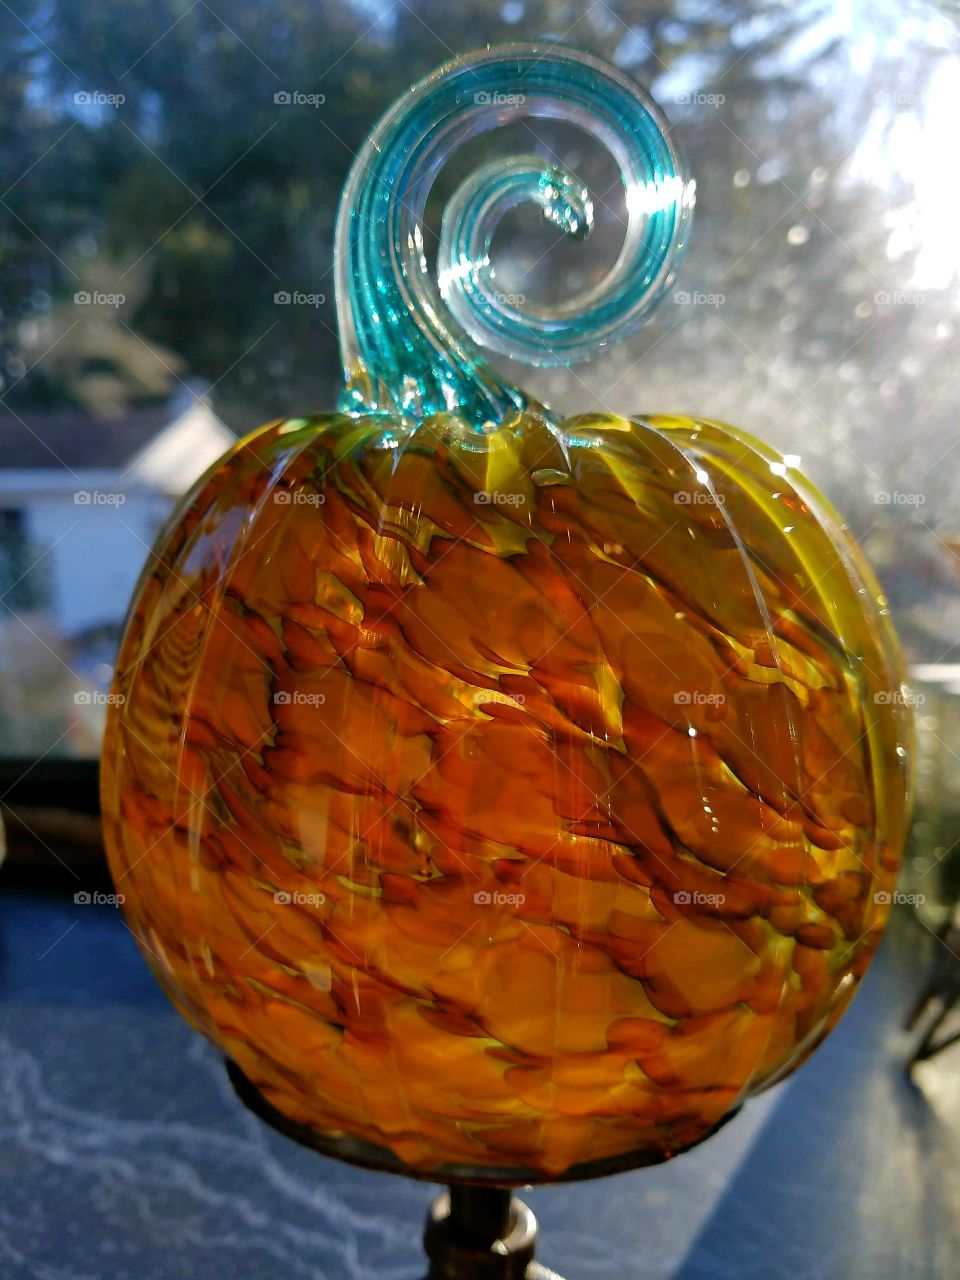 Hand blown glass pumpkin displayed on stand in sunny window. Stem is blue spiral & pumpkin is shaded with colors of orange.